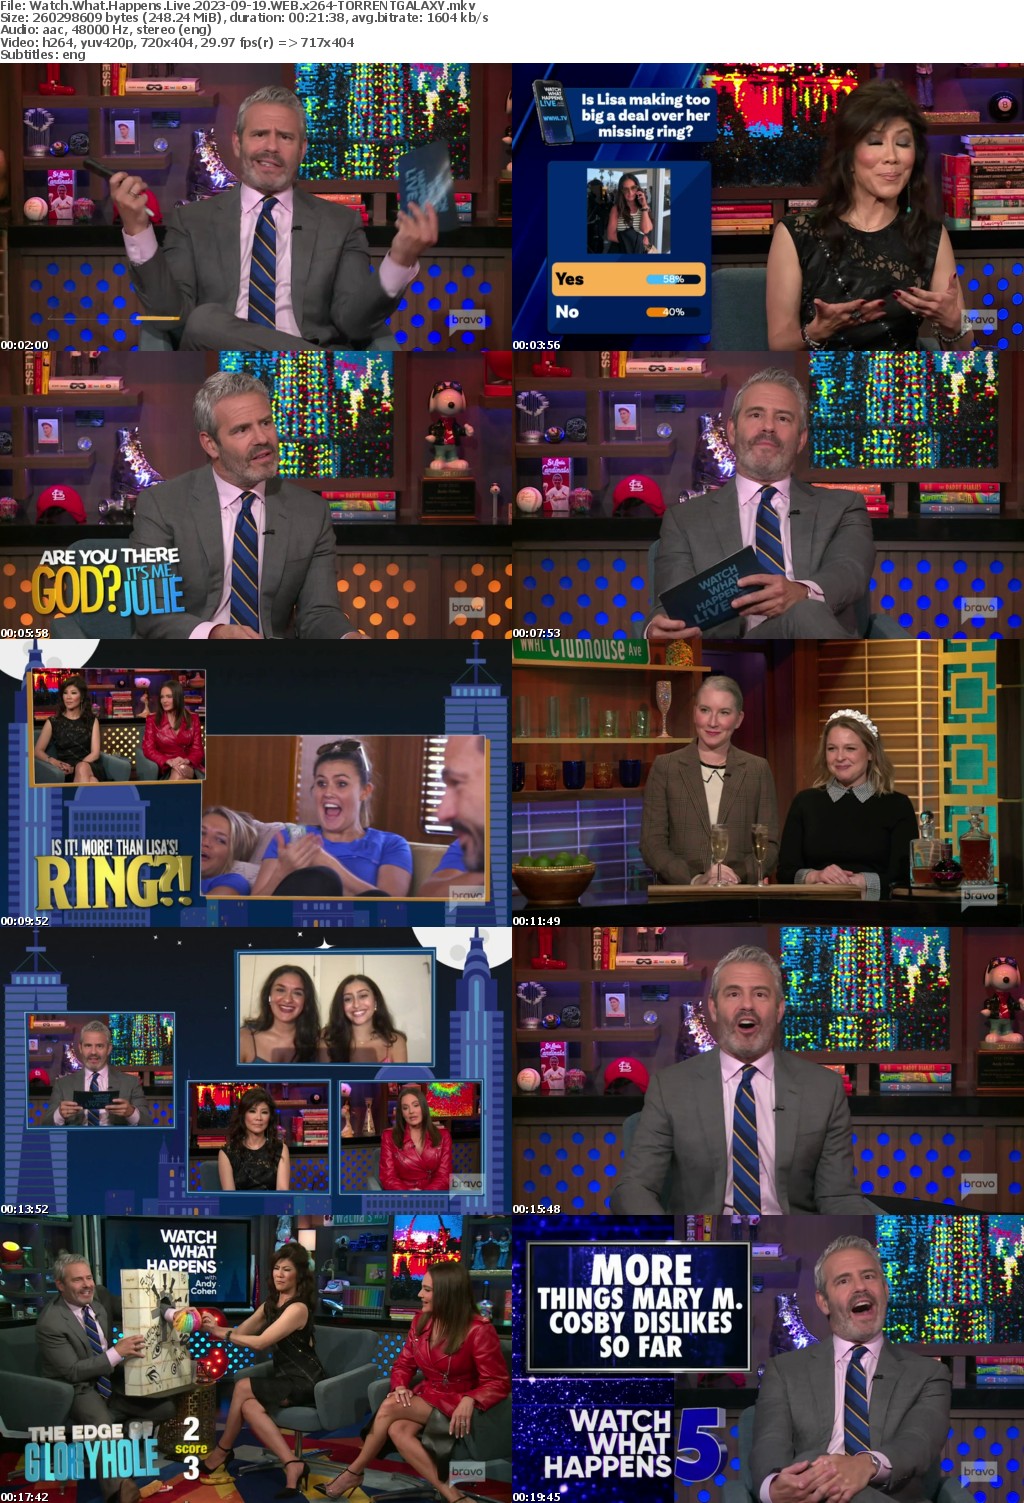 Watch What Happens Live 2023-09-19 WEB x264-GALAXY